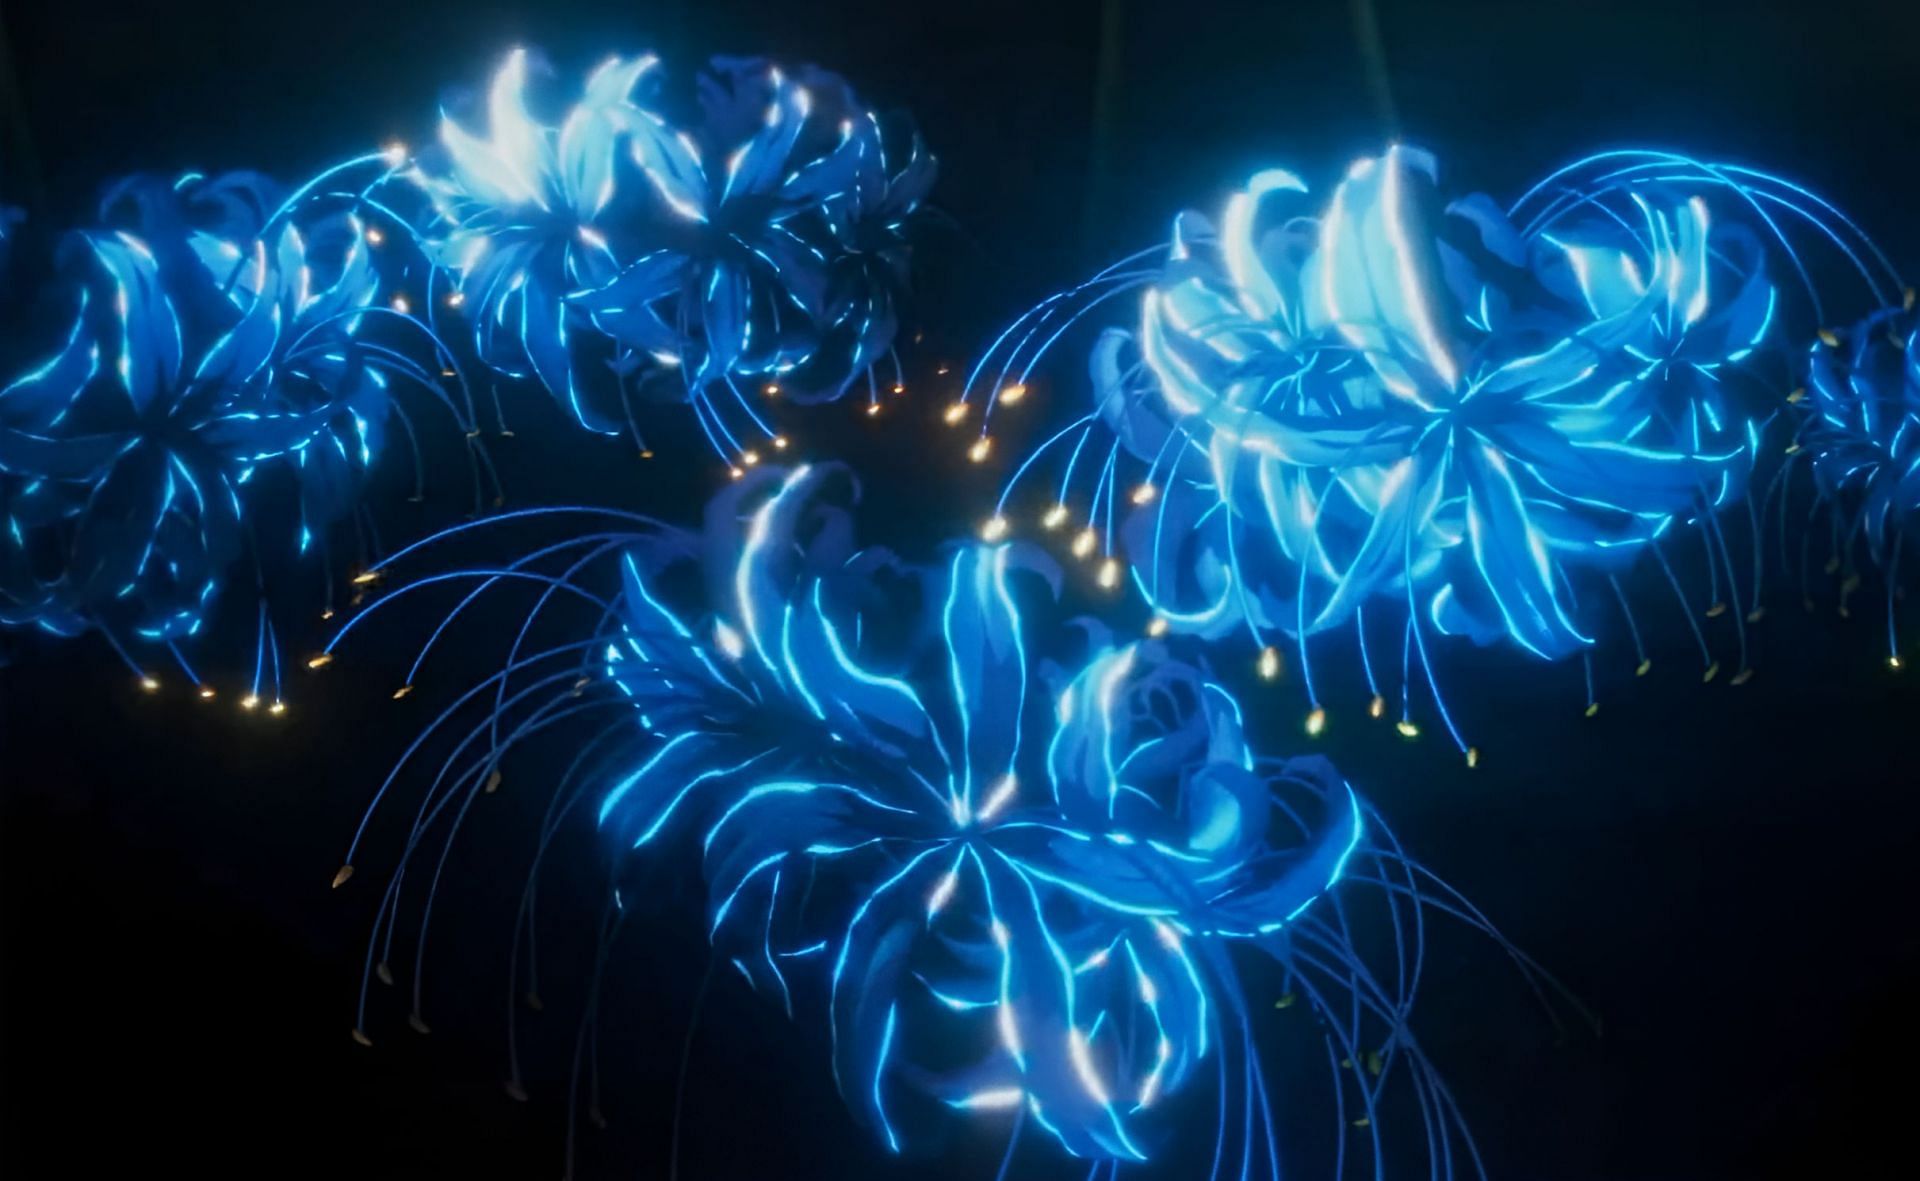 Blue Spider Lily as seen in the Demon Slayer season 4 ending theme song(Image via Ufotable)